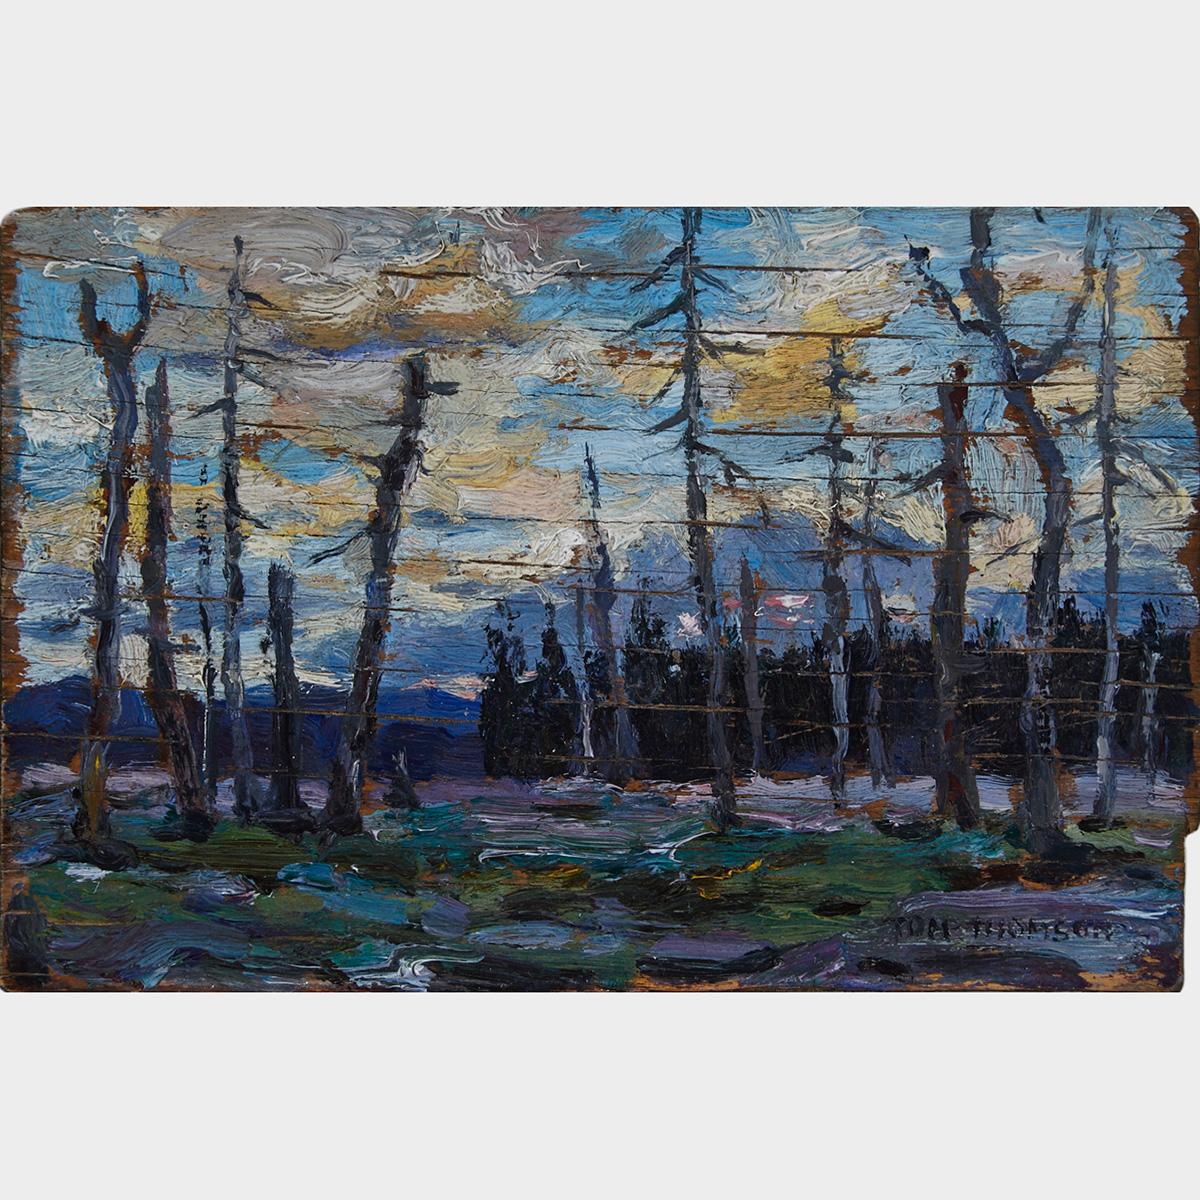 IN THE MANNER OF TOM THOMSON